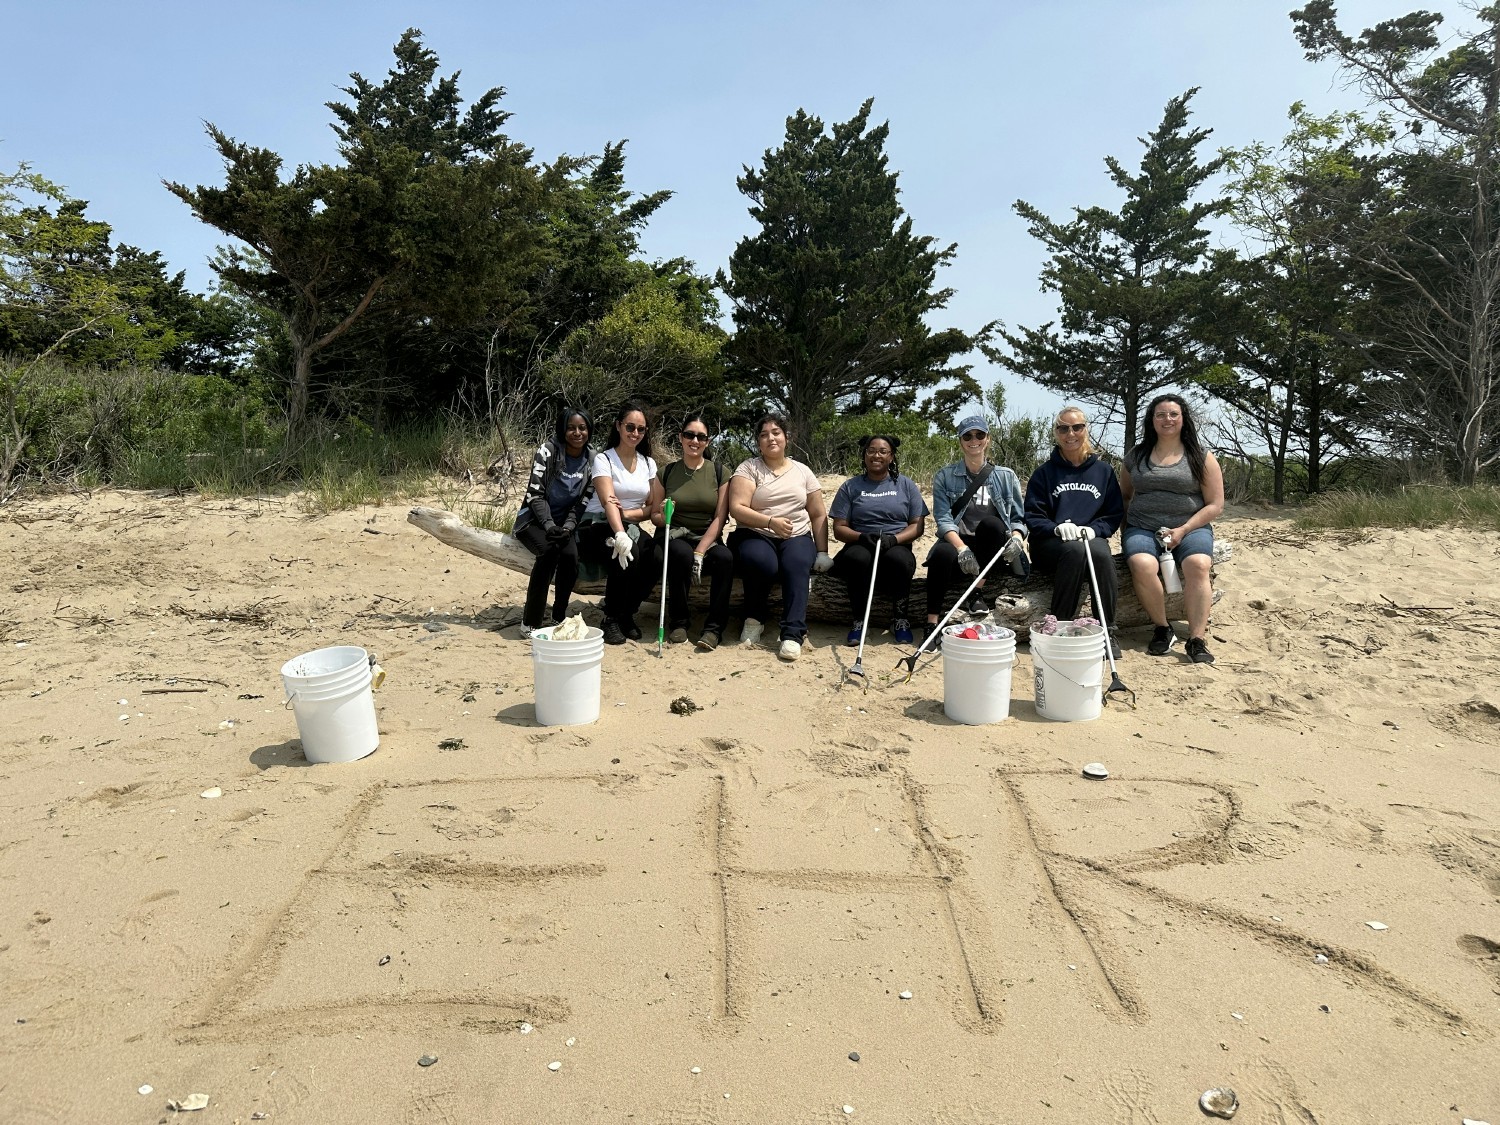 Cleaning up one of our beloved New Jersey beaches on nearby Sandy Hook.